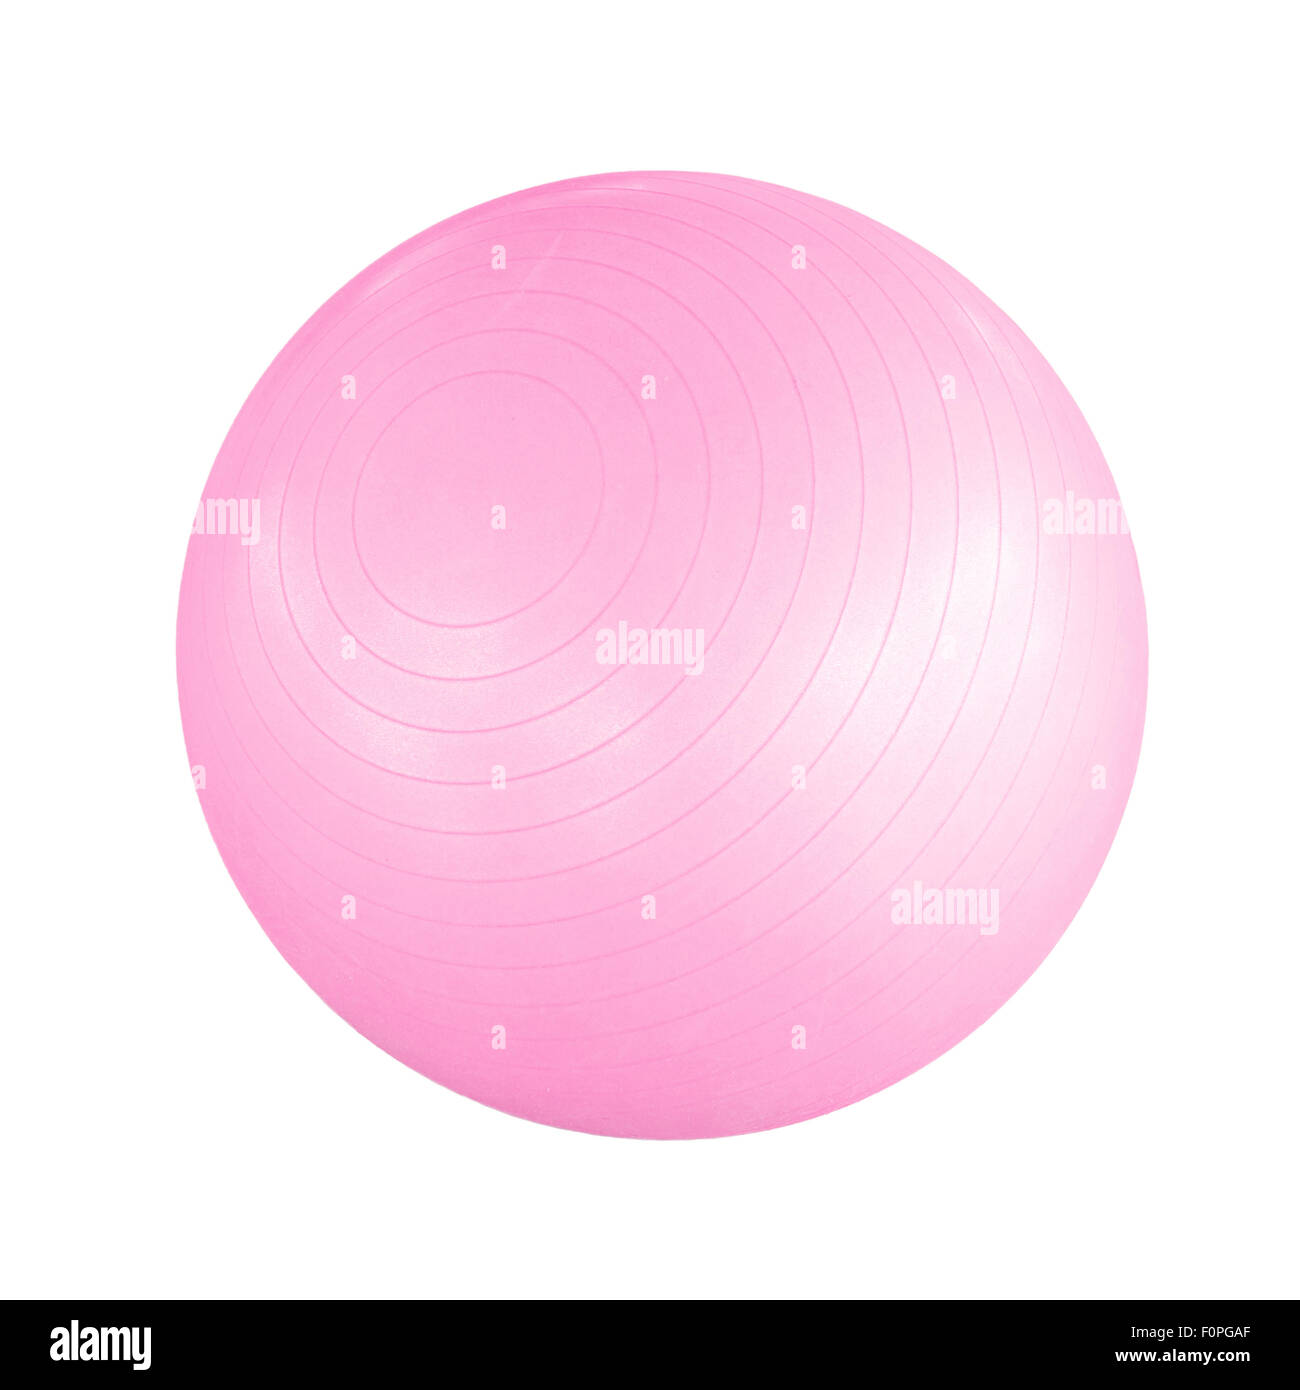 Pink pilates ball Cut Out Stock Images & Pictures - Alamy